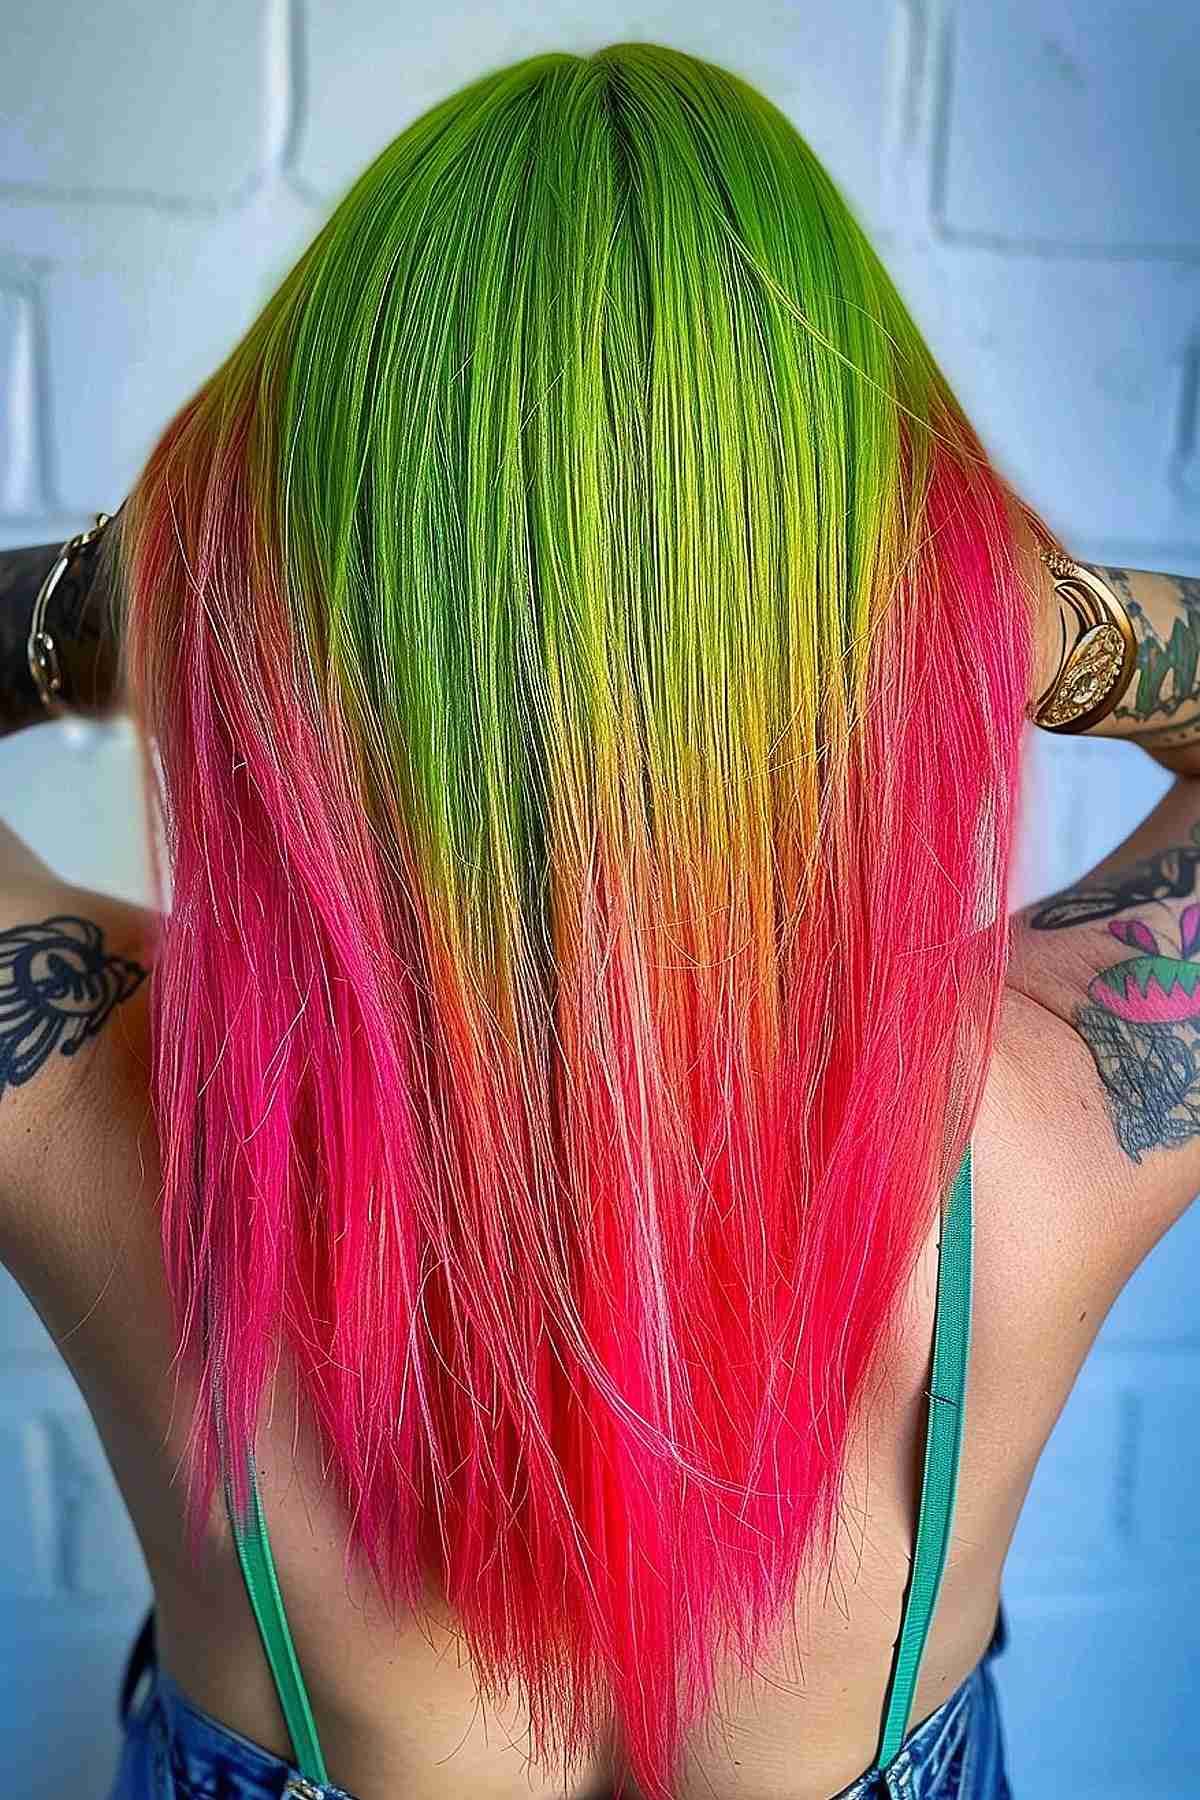 A woman's long, straight hair displaying a dramatic color transition from lime green at the roots through yellow to flamingo pink and red at the tips, embodying a fiery watermelon-inspired look.